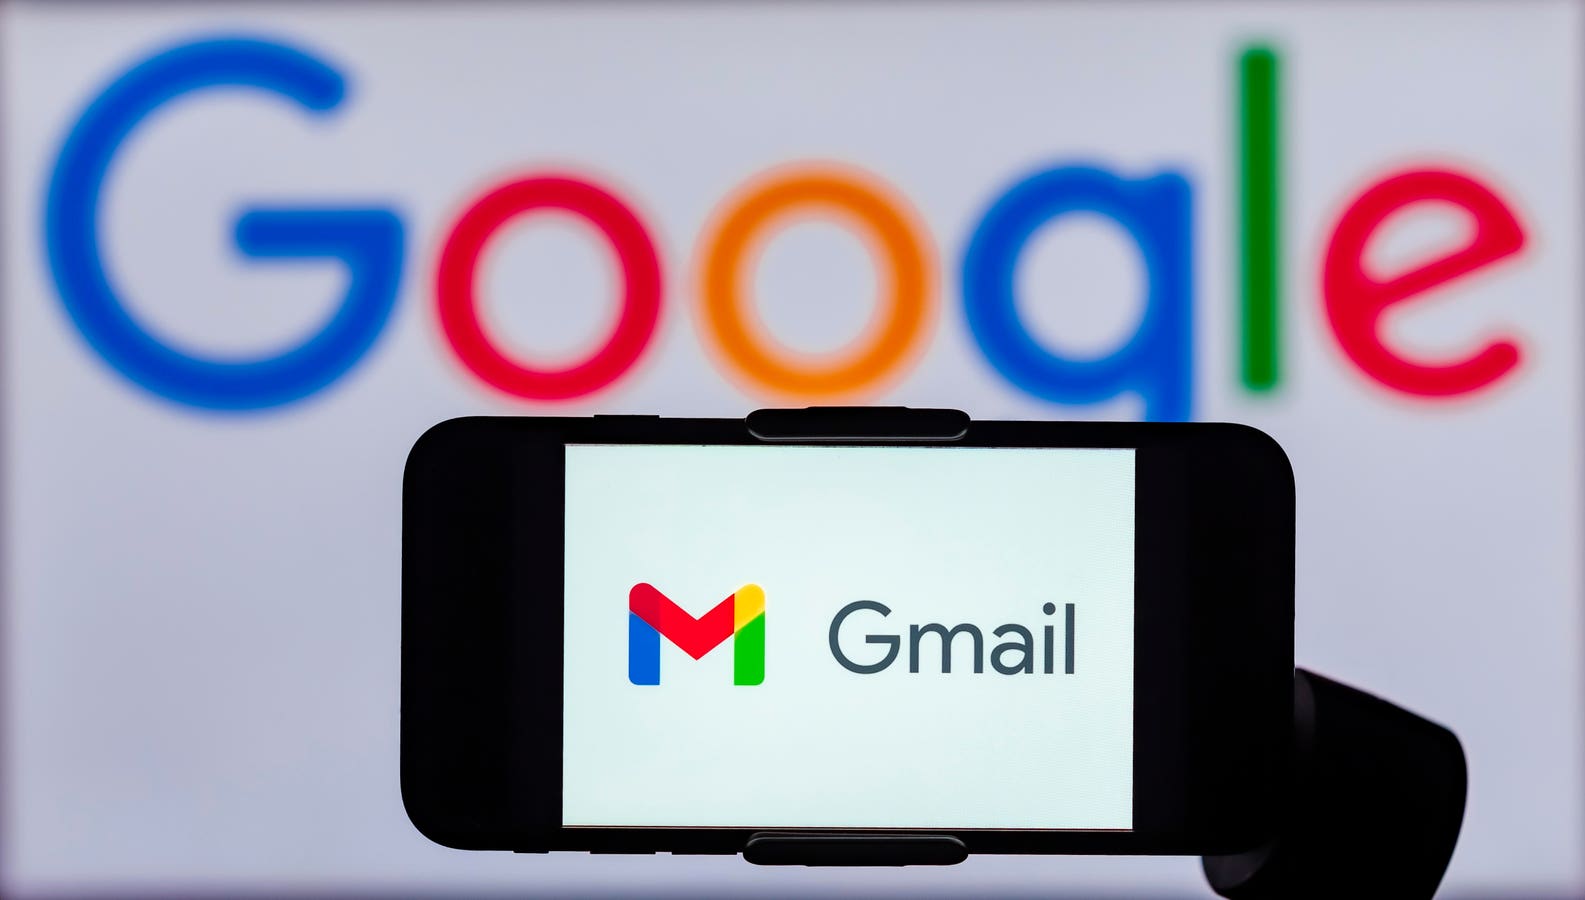 Google Boosts Gmail and Drive Security with AI Against Phishing